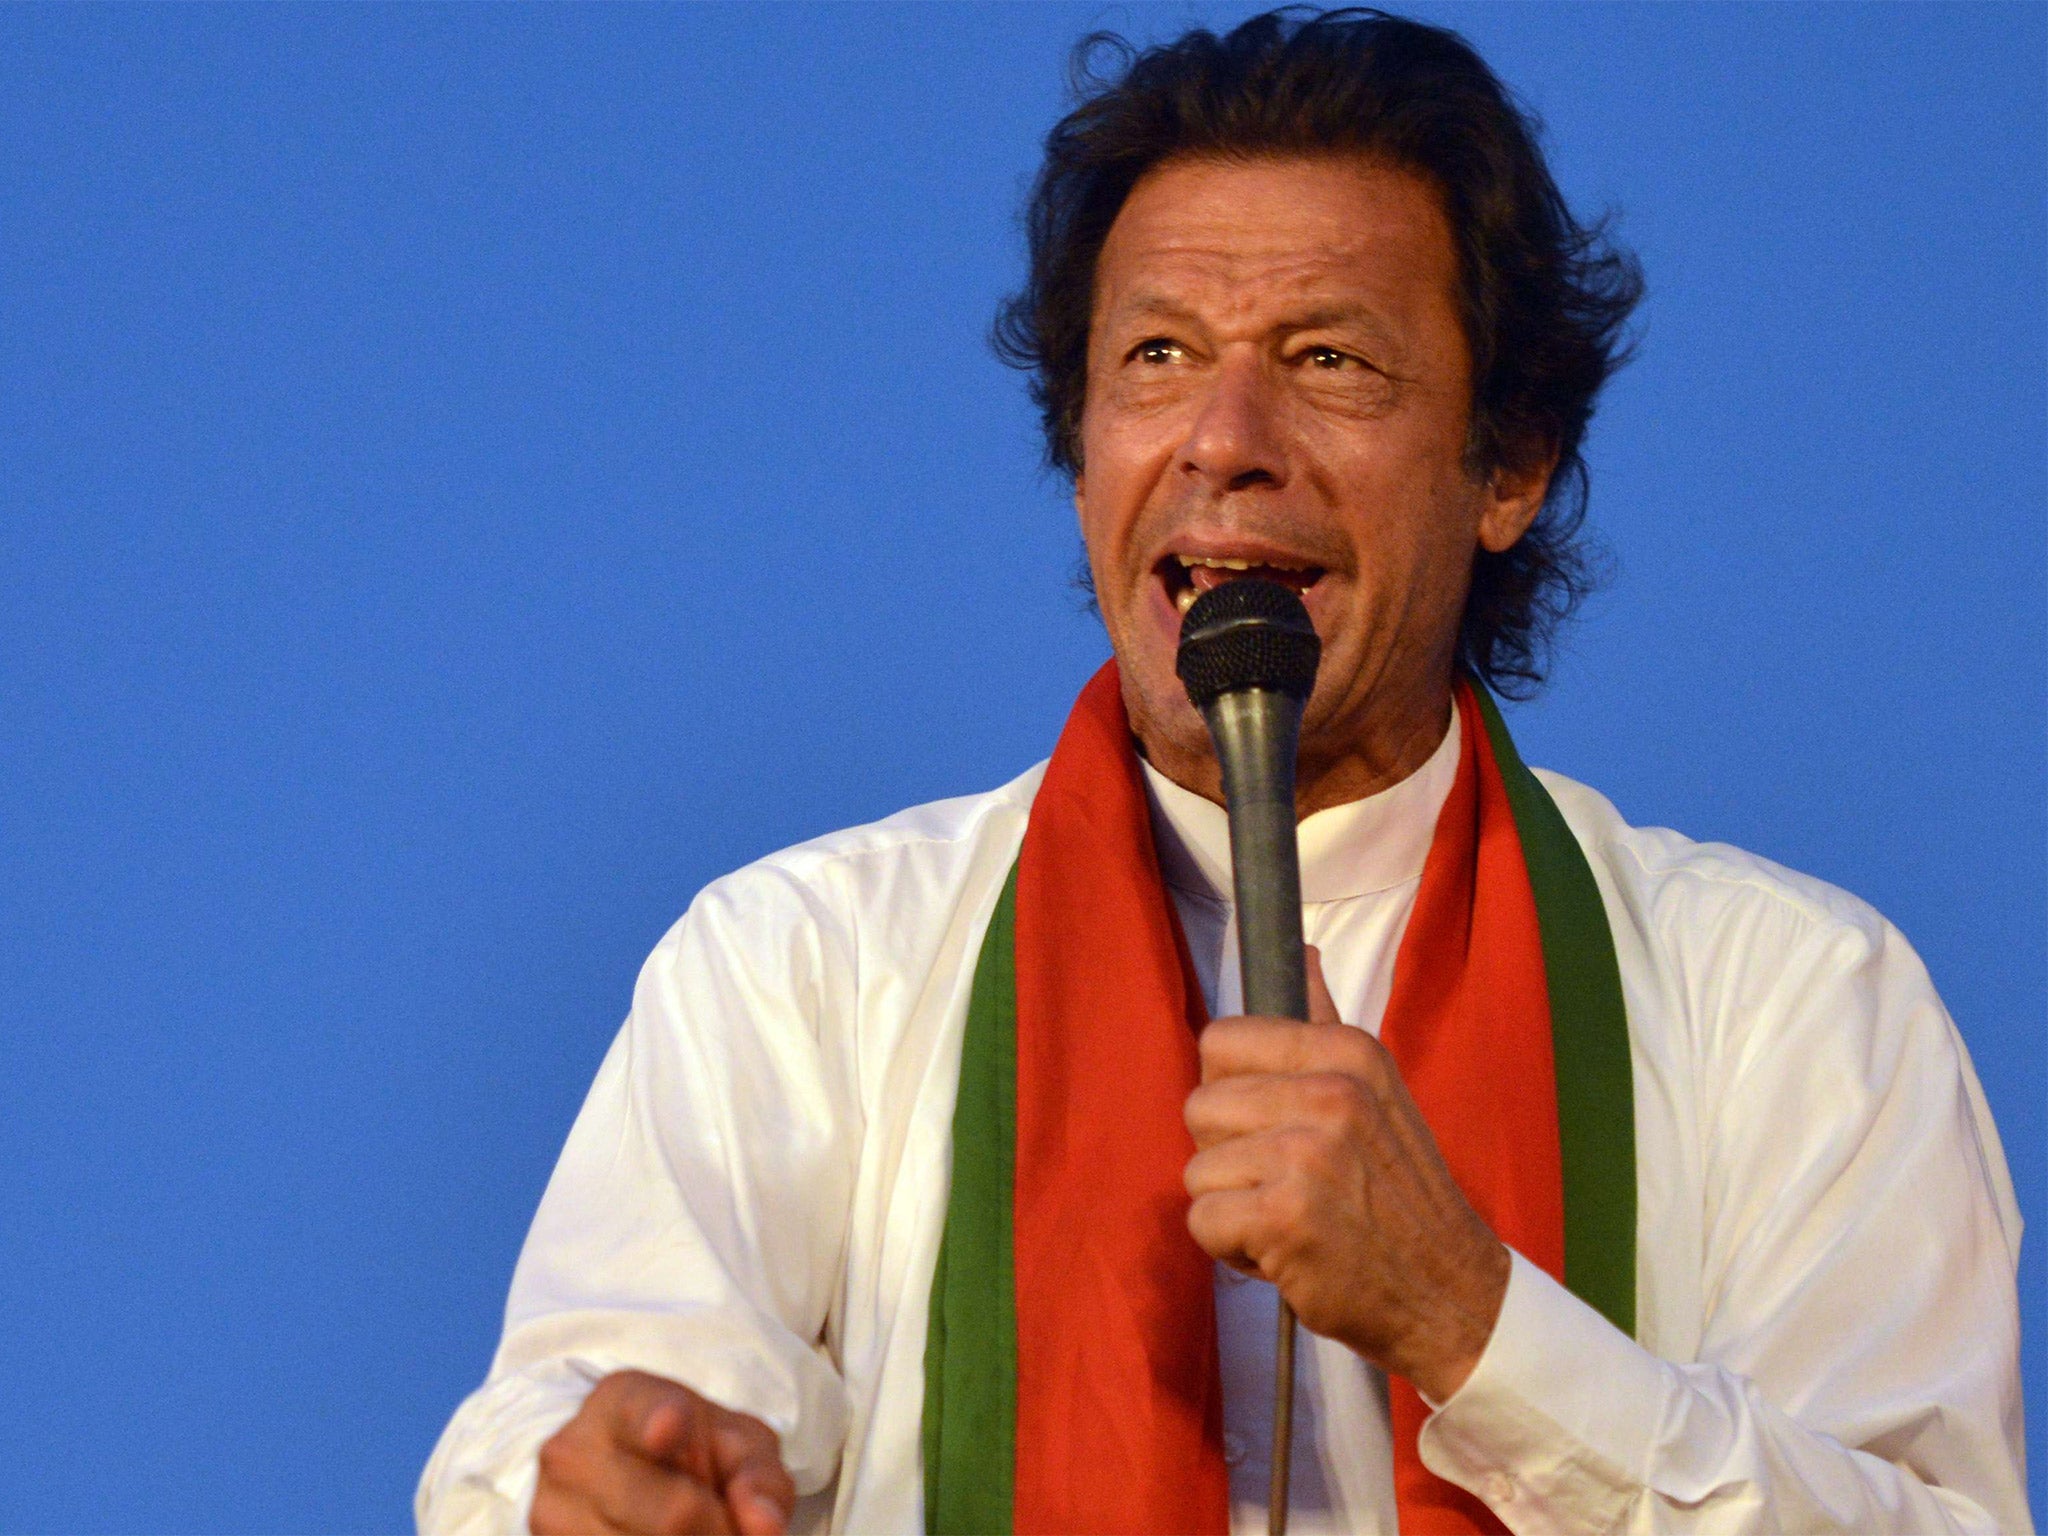 Khan enjoys a legendary charisma, mostly born of his cricketing prowess, but the country faces formidable challenges in terms of corruption, the economy, health and education